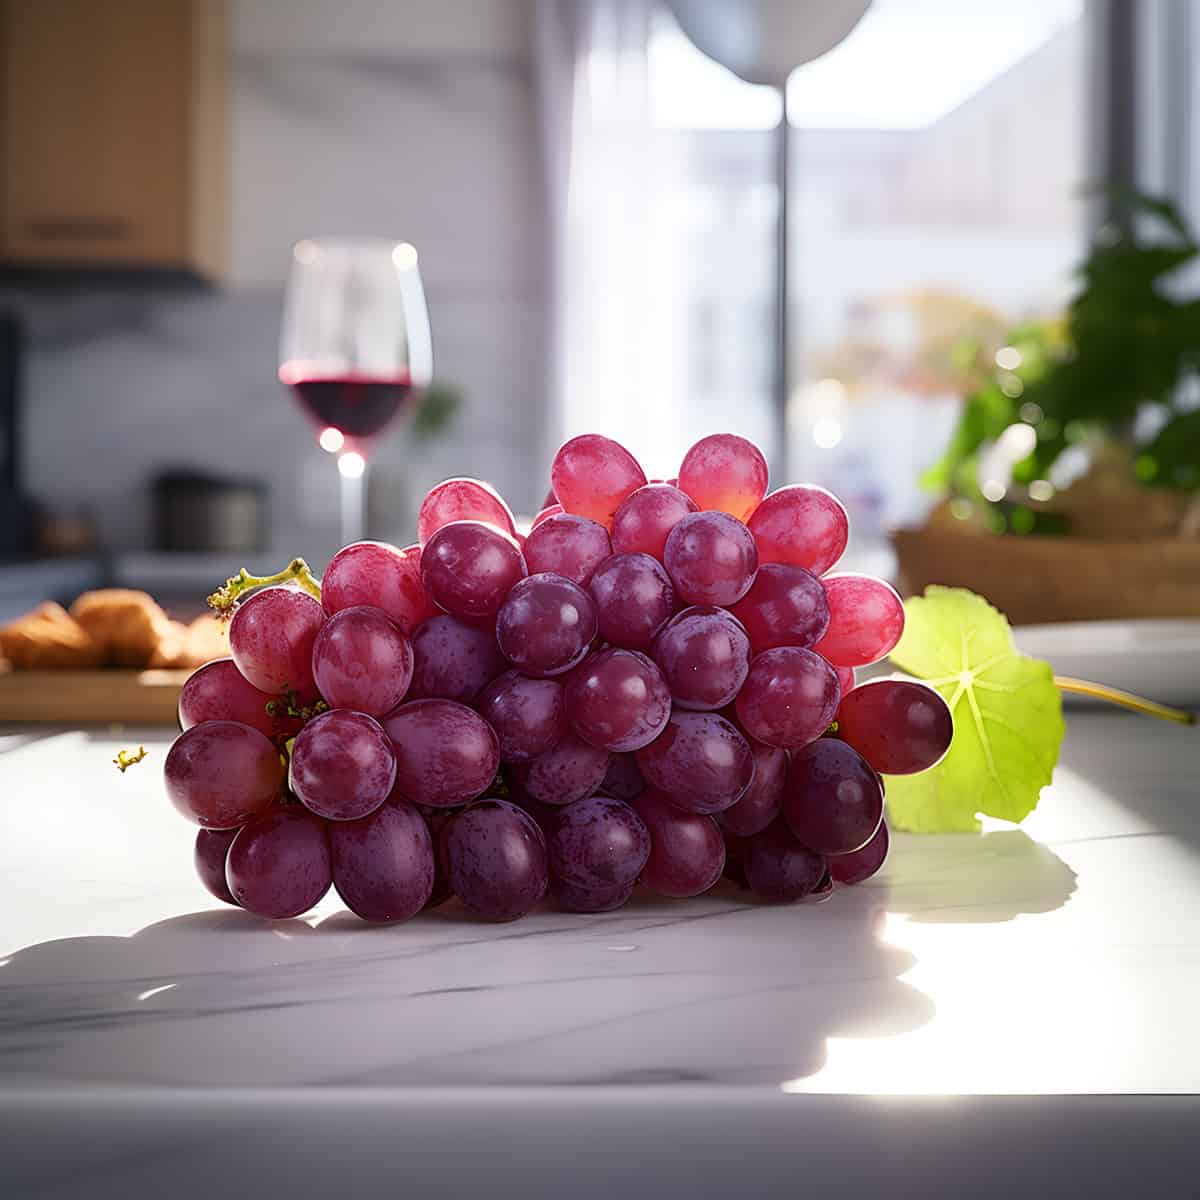 Grapes on a kitchen counter